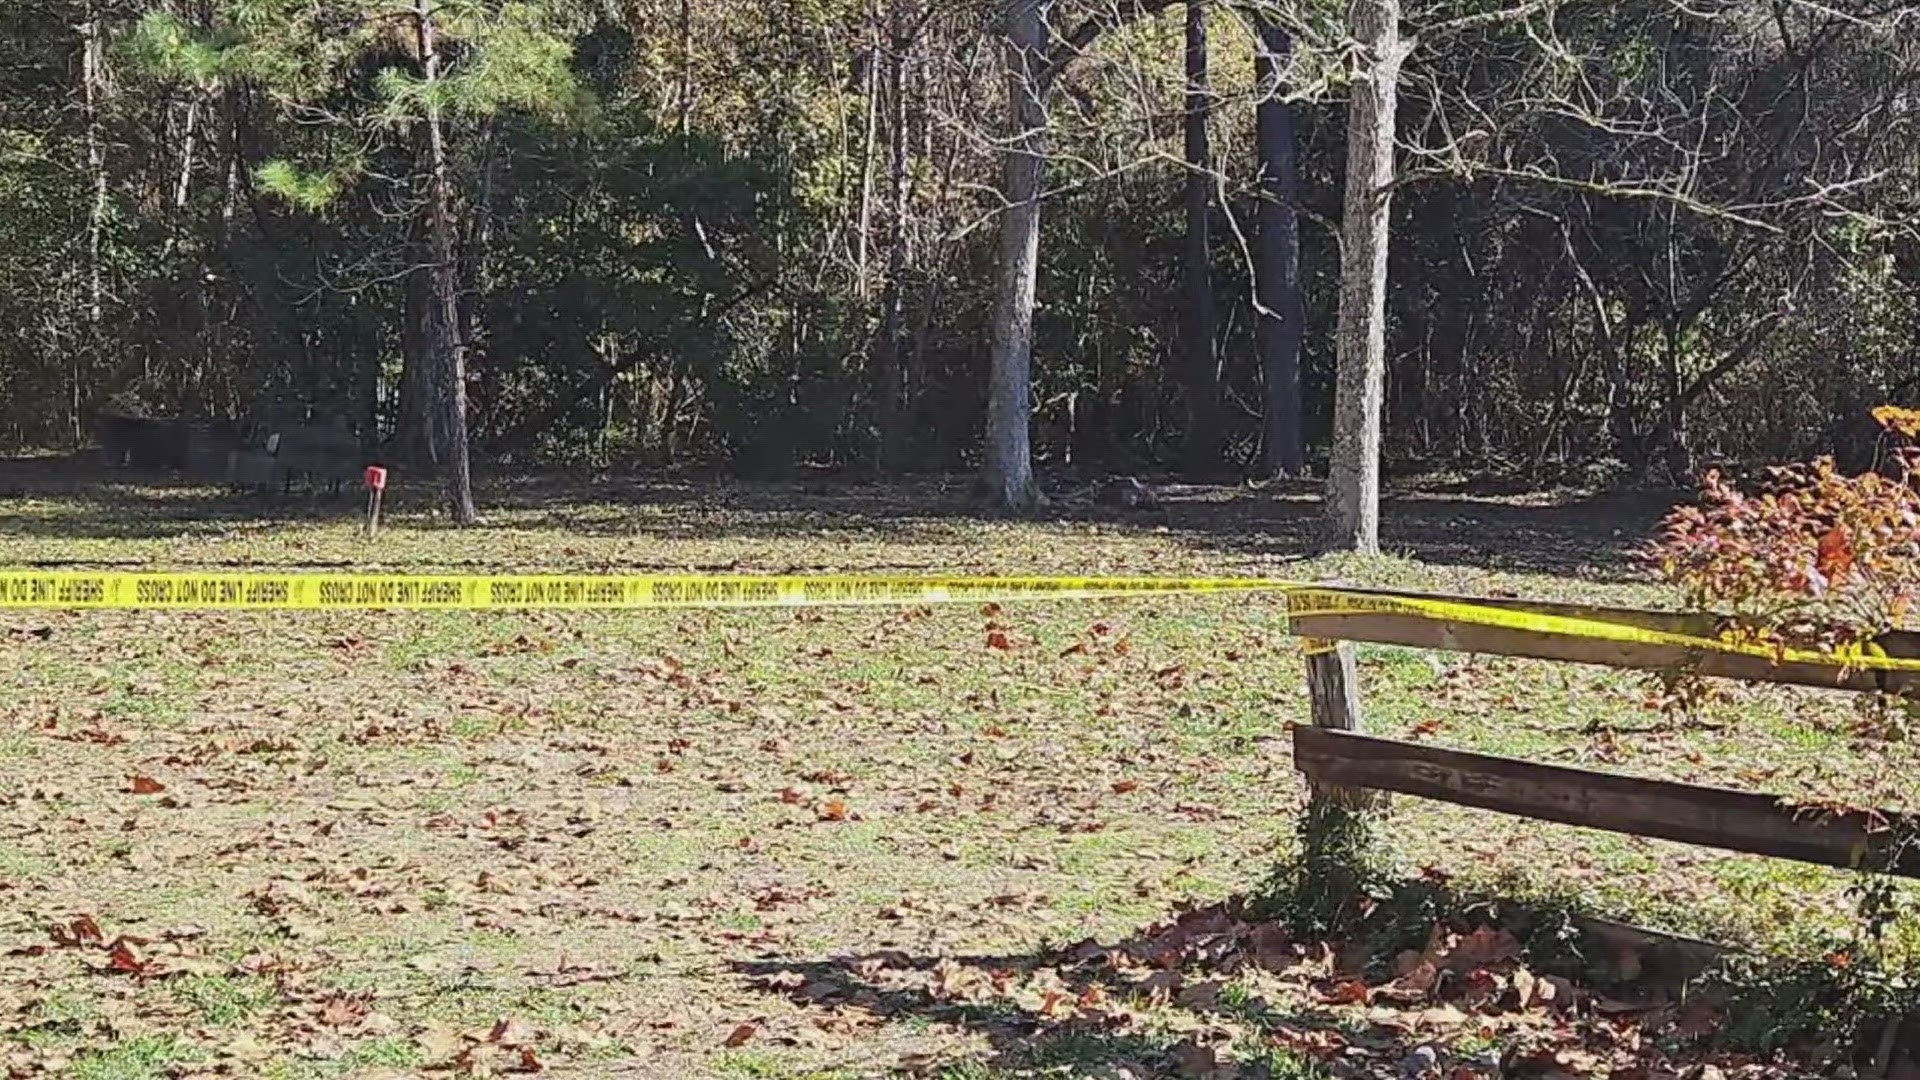 A search was made of what deputies described as a "historical residence and property" but no other remains were found.